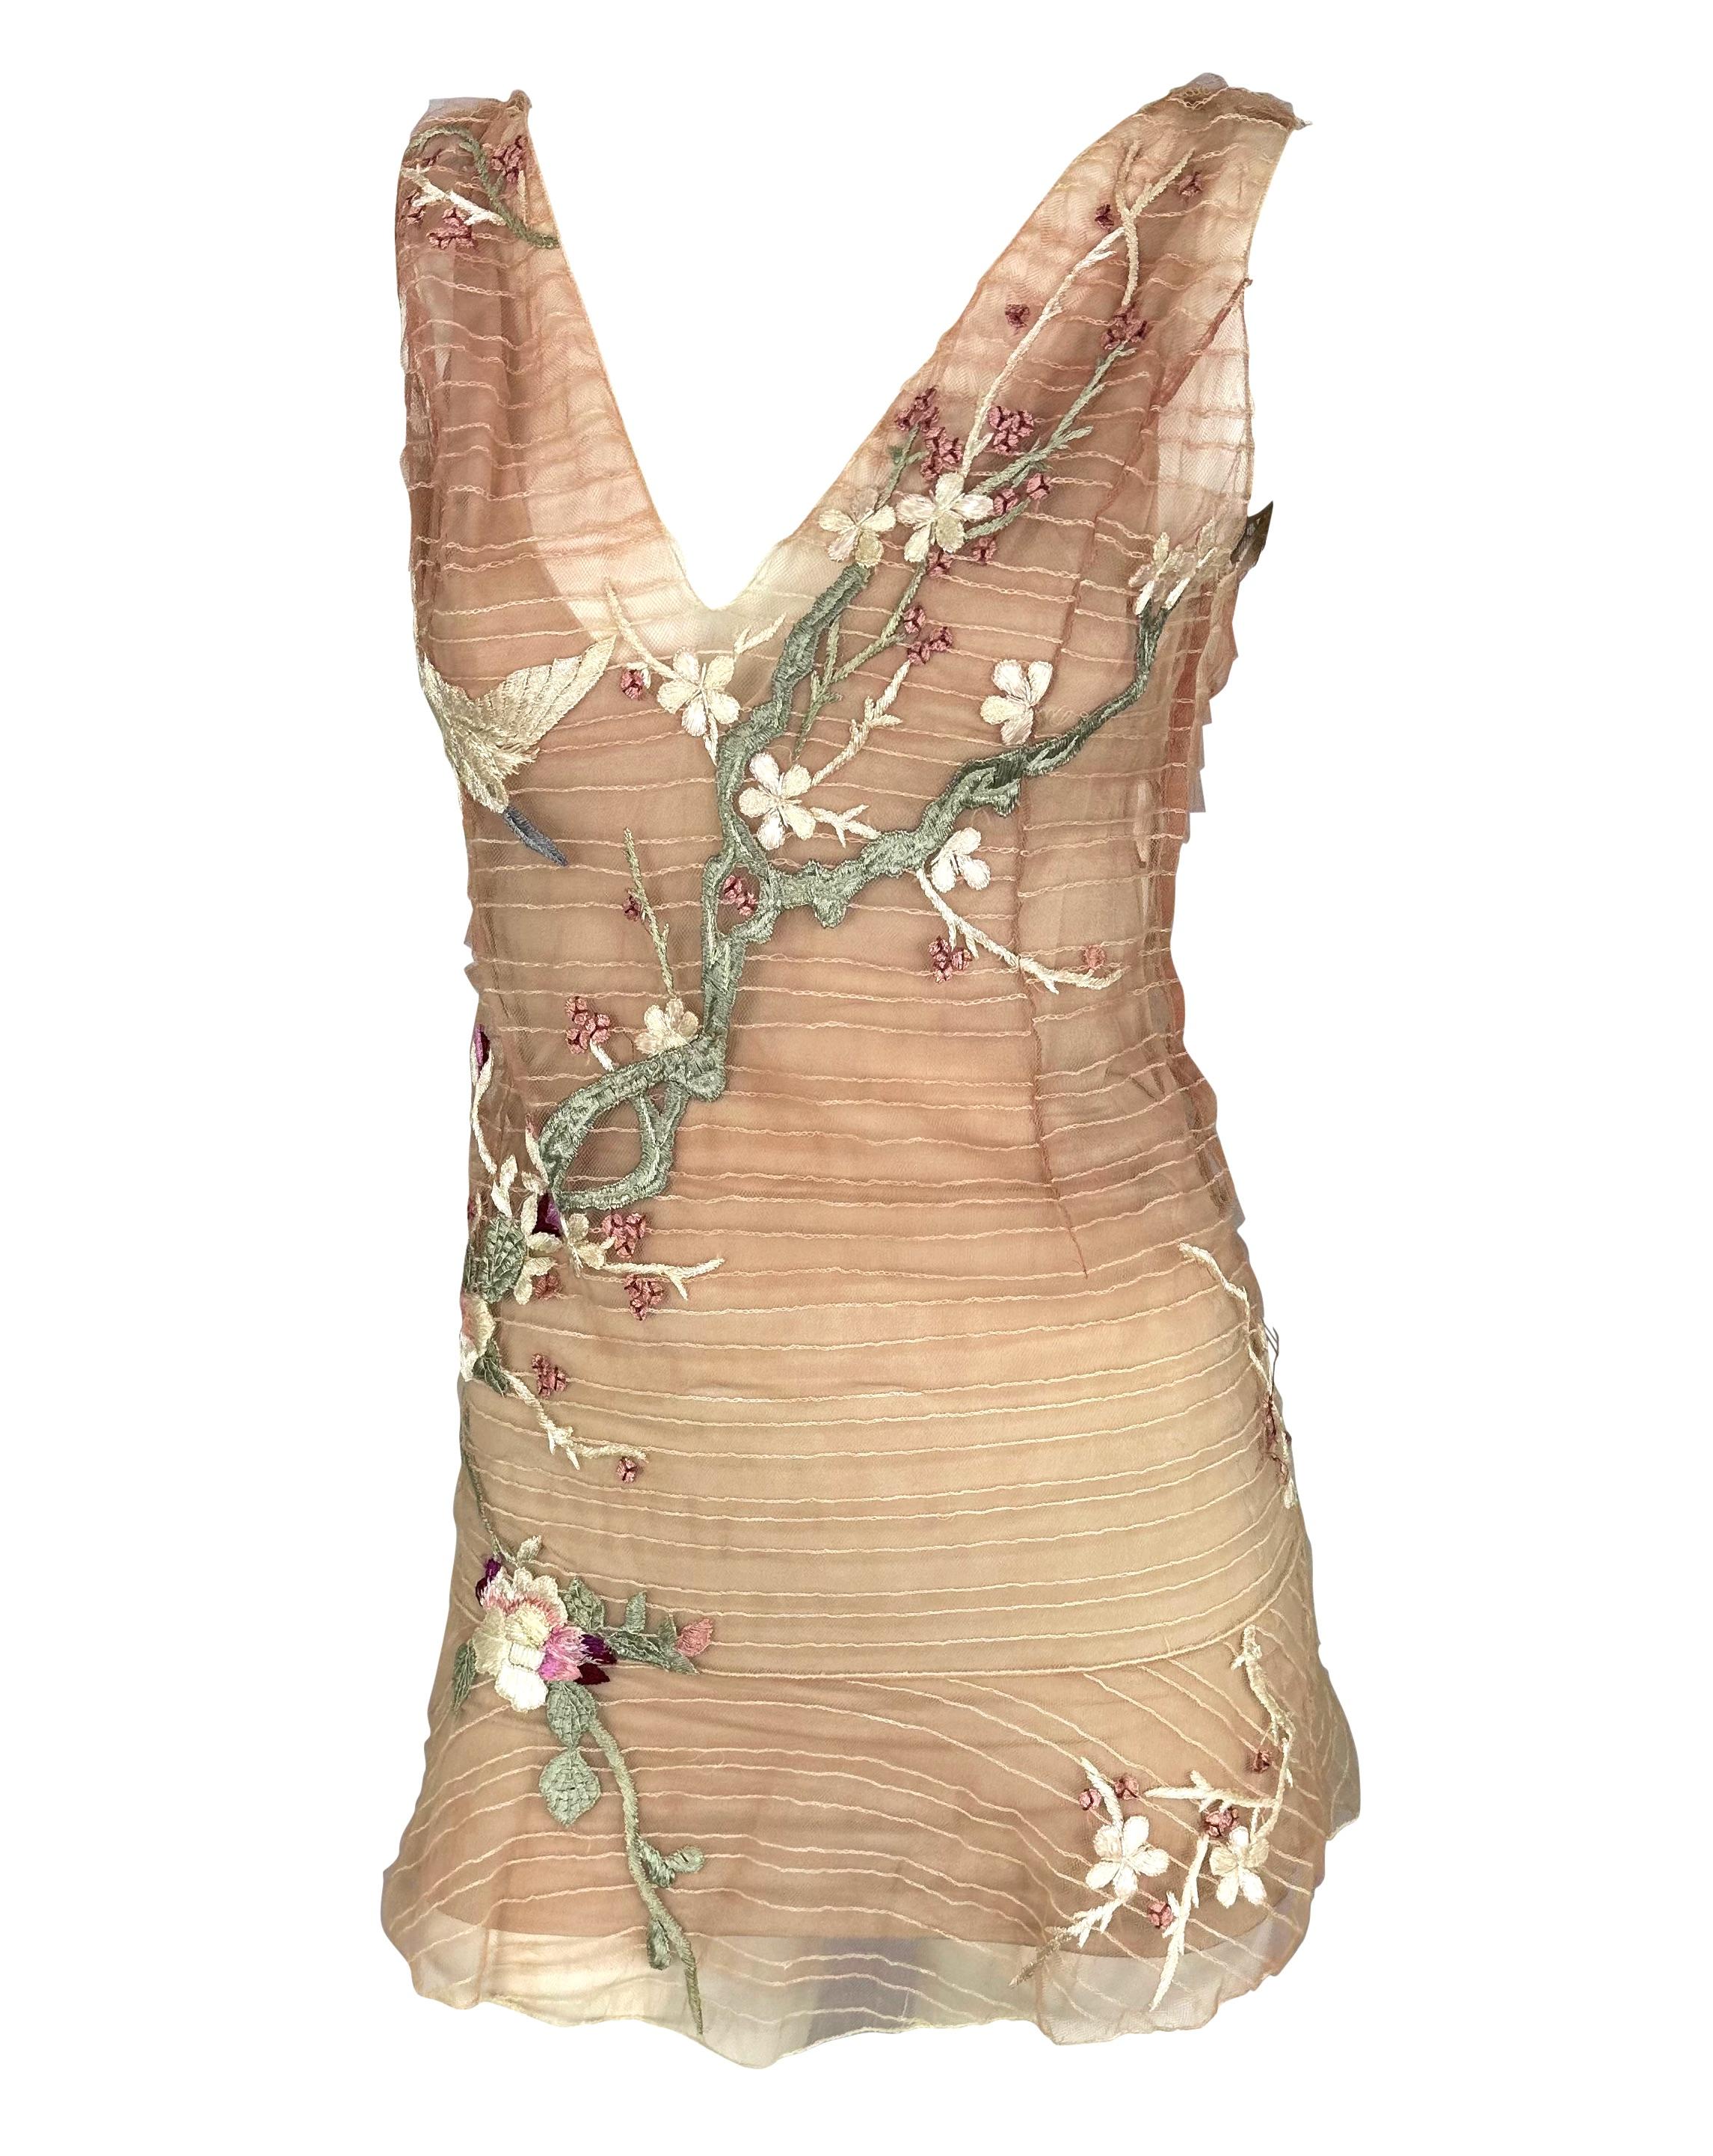 S/S 2003 Gucci by Tom Ford Runway Cherry Blossom Embroidered Pink Mini Dress For Sale 6